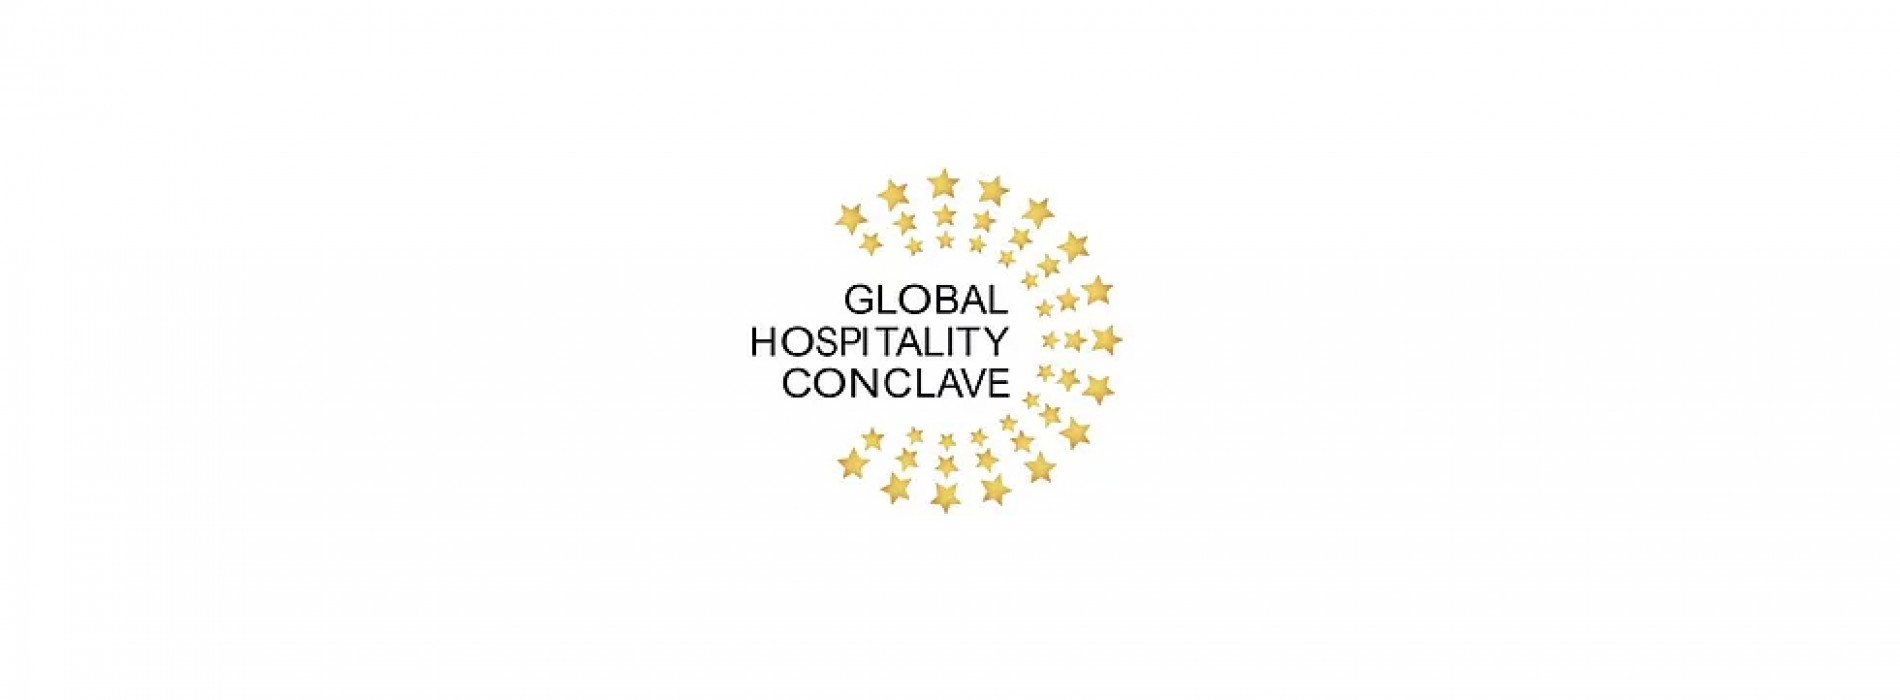 Fourth edition of Global Hospitality Conclave to be held in the Capital in January 2017